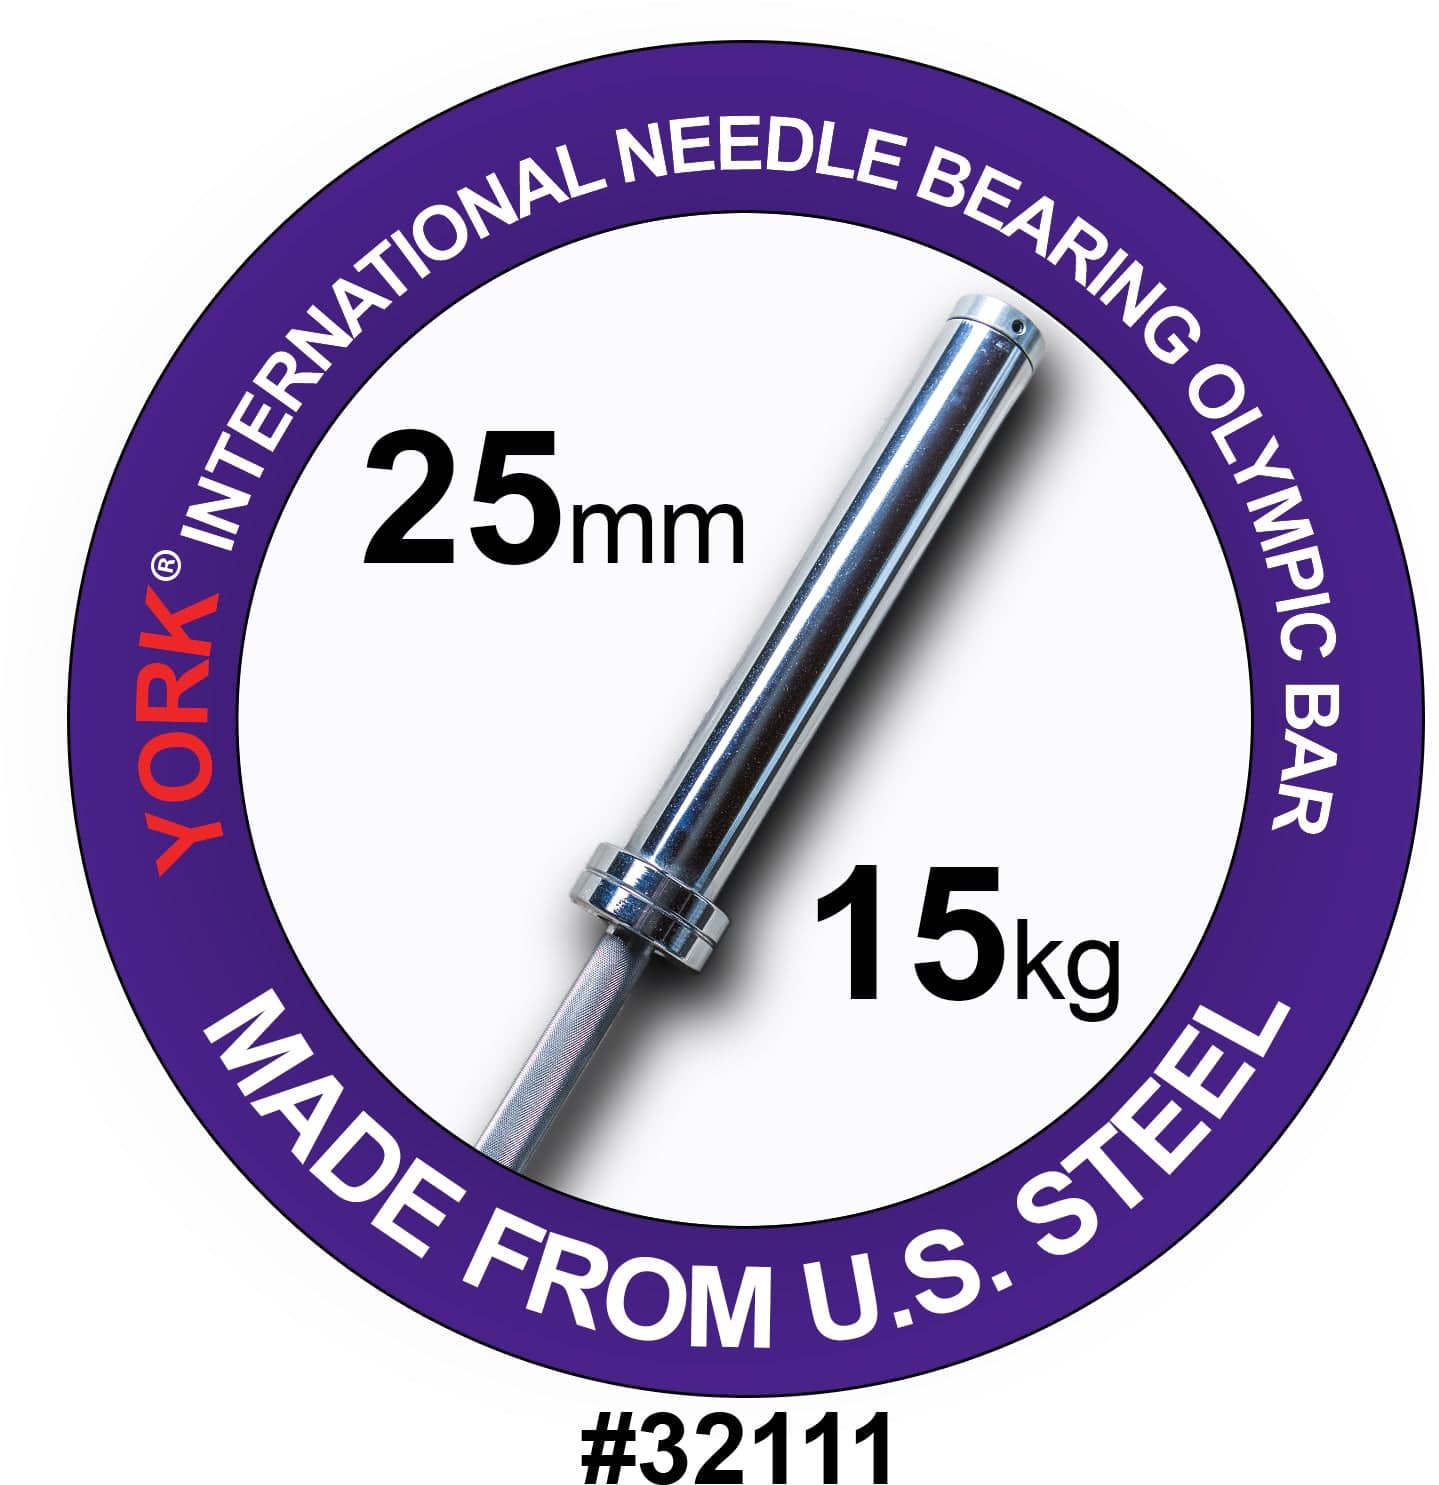 York Barbell | International Women's Needle-Bearing Olympic Training Bar - 6.5ft (25mm) - XTC Fitness - Exercise Equipment Superstore - Canada - Olympic Lifting Barbell